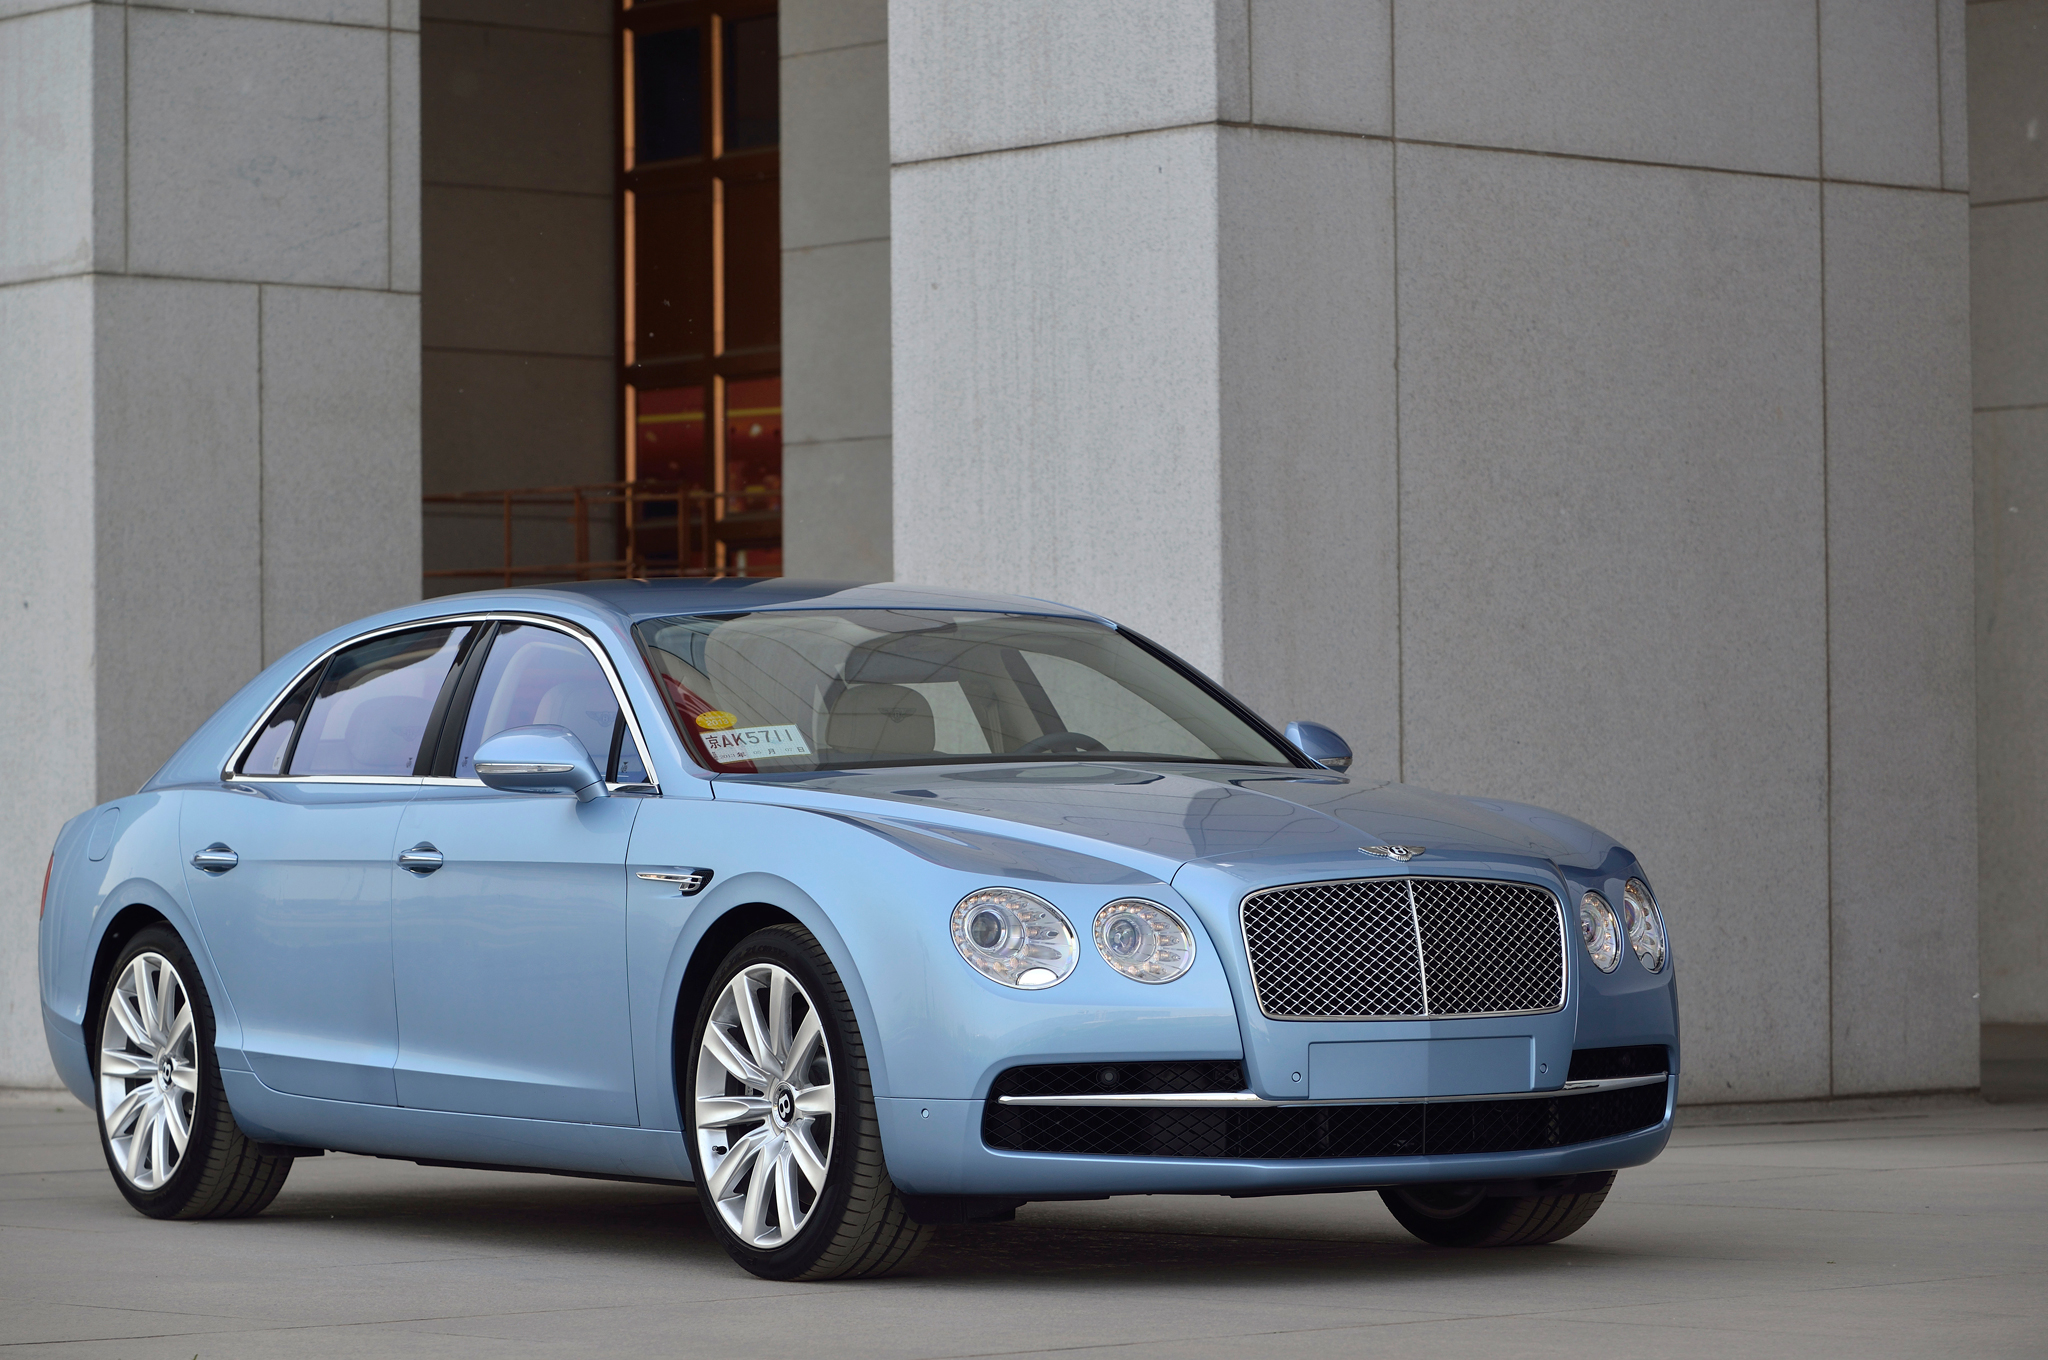 Images of 2014 Bentley Flying Spur | 2048x1360